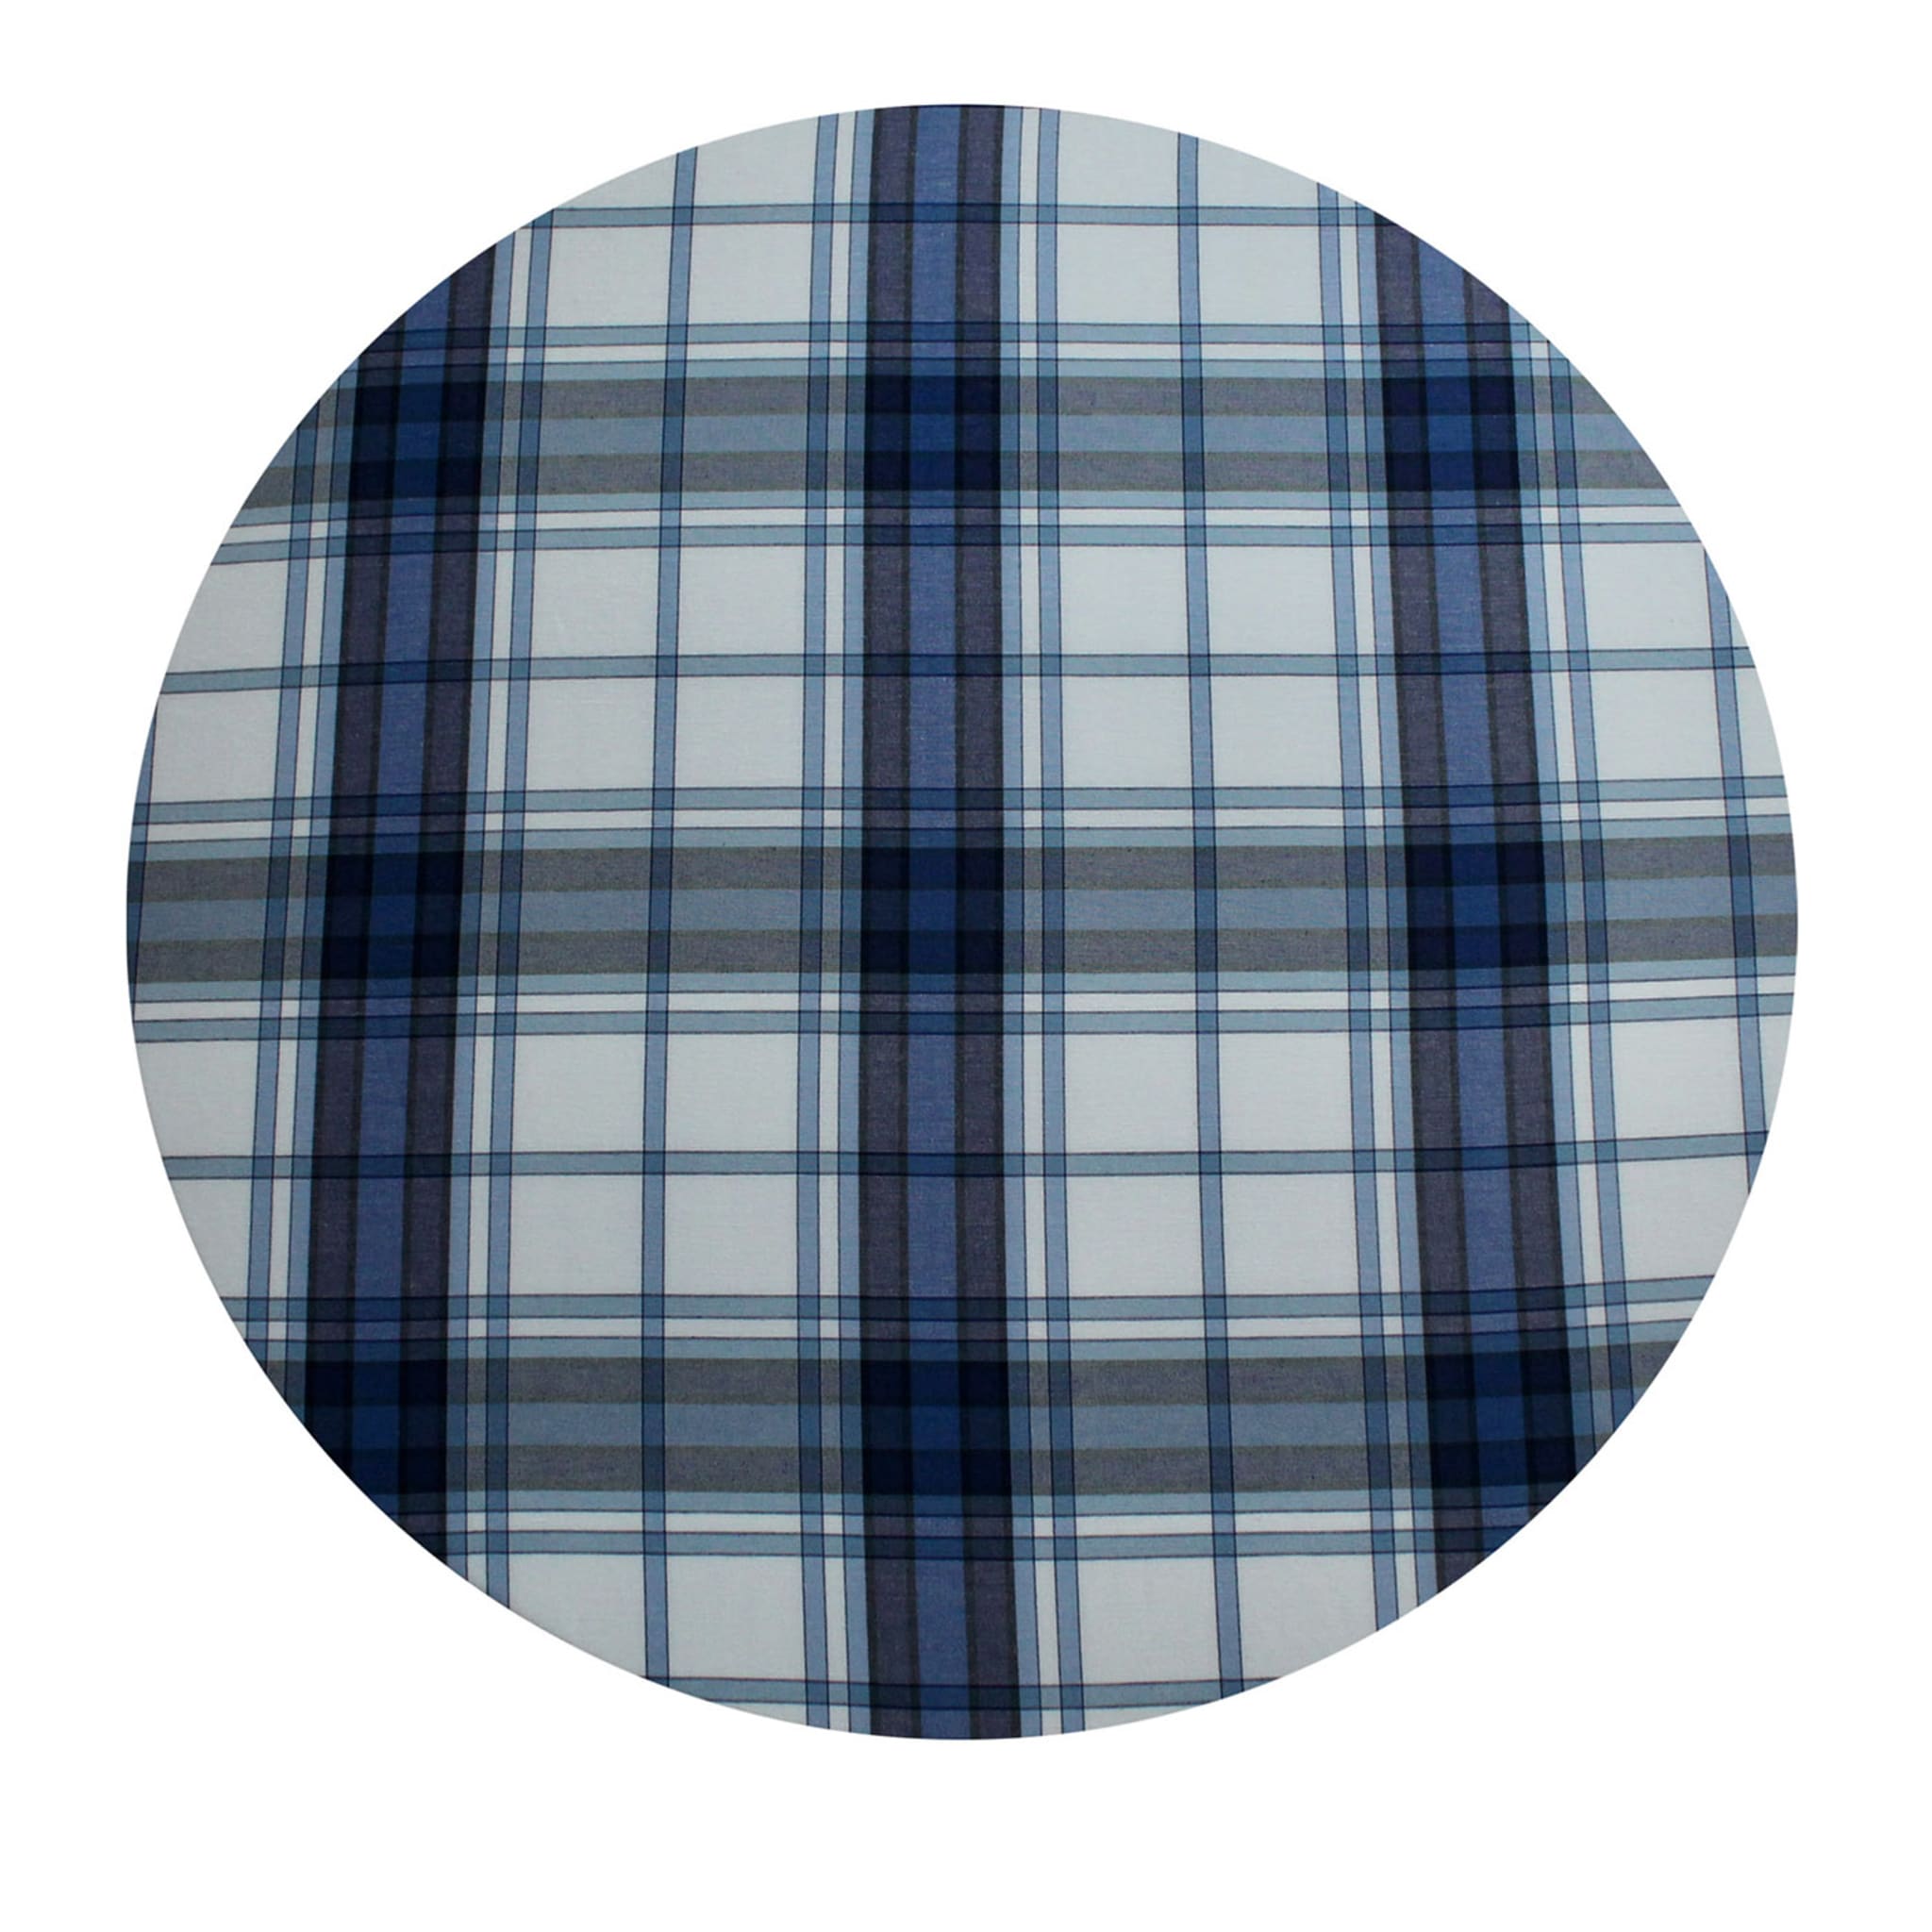 Cuffiette Check Round Blue & White Placemat  - Main view